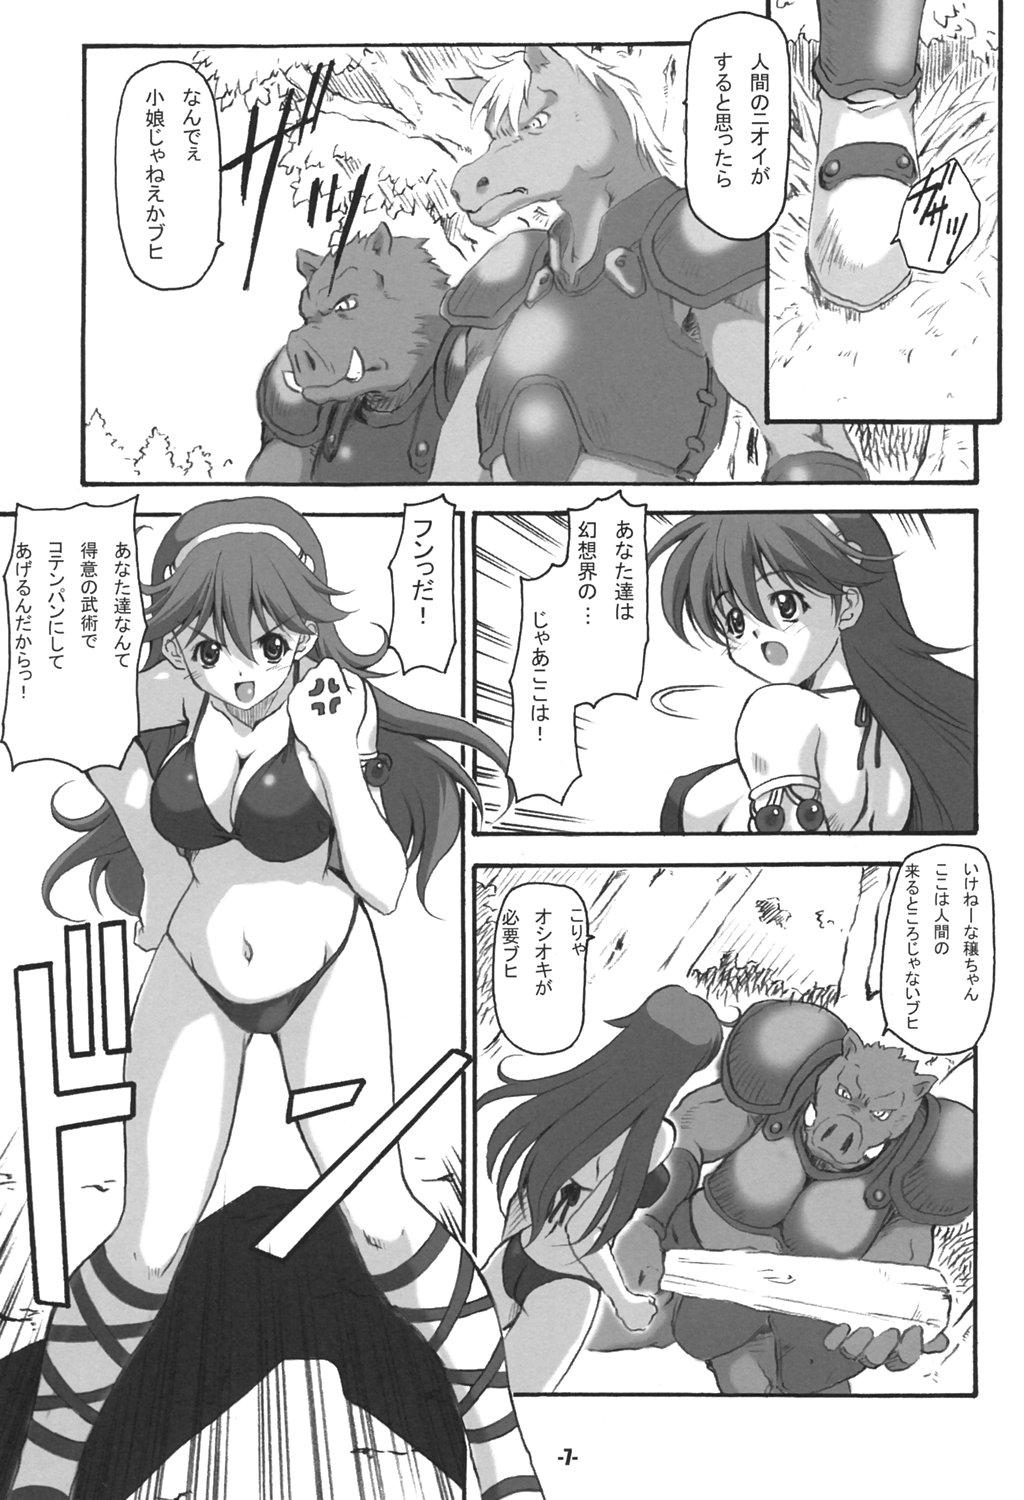 Deepthroat A's EXtra strage vol. 18 - King of fighters Stretching - Page 6